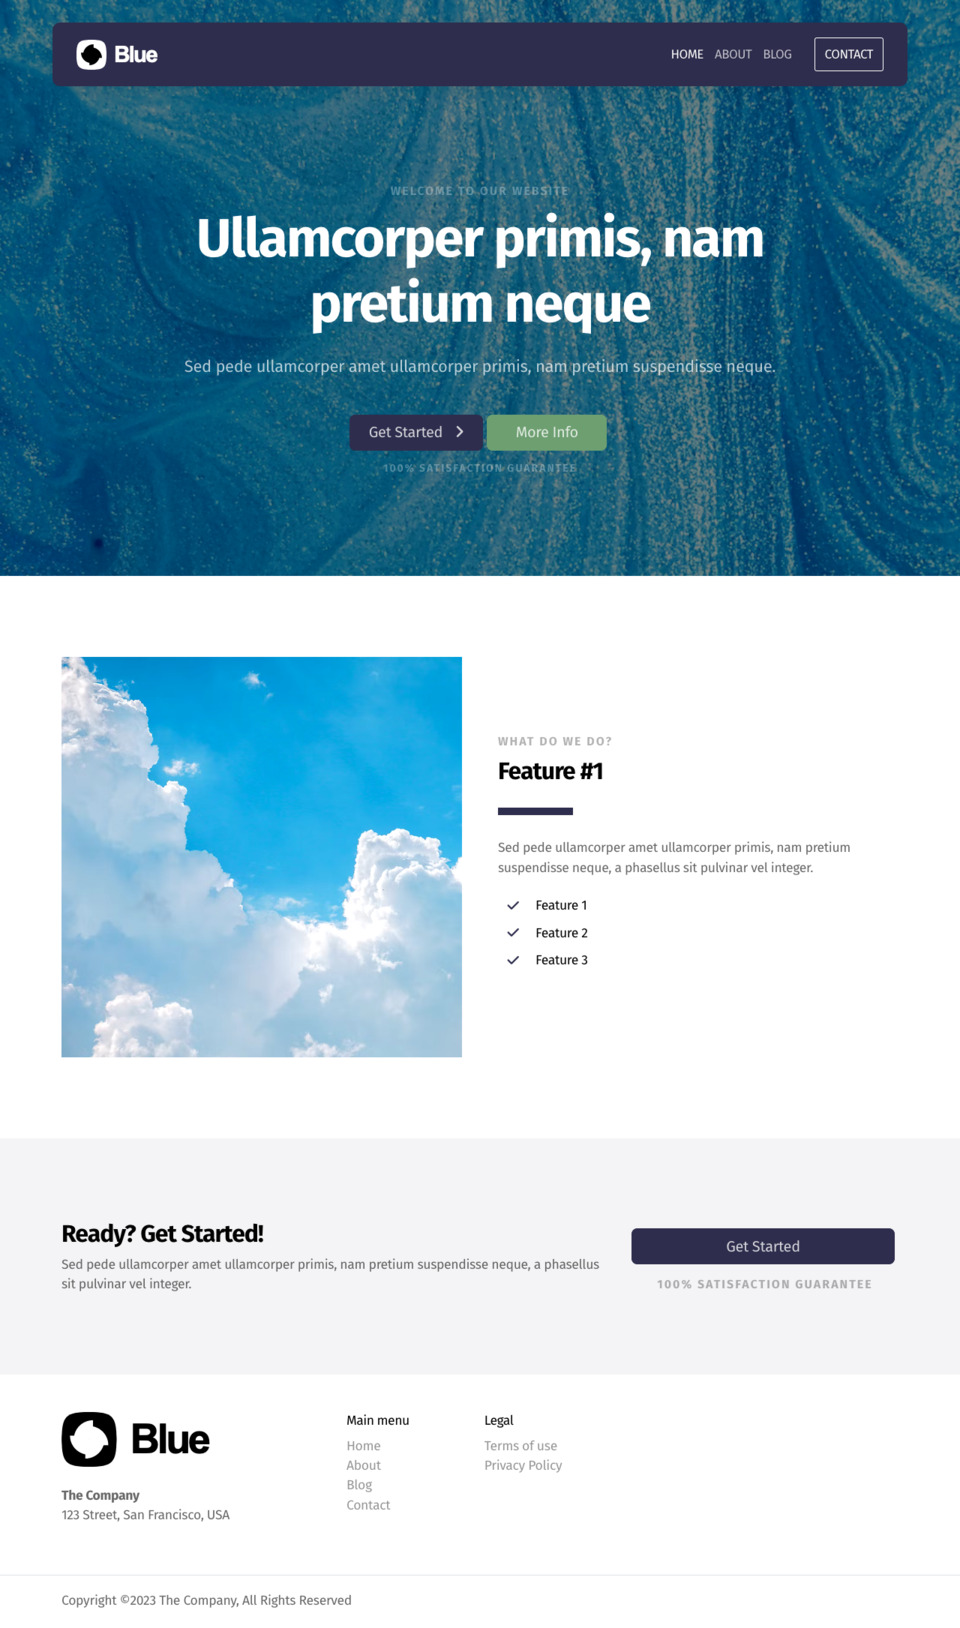 Blue Website Template - Ideal for online businesses, marketing professionals, educators, and anyone looking for a visually appealing and easy-to-manage website.